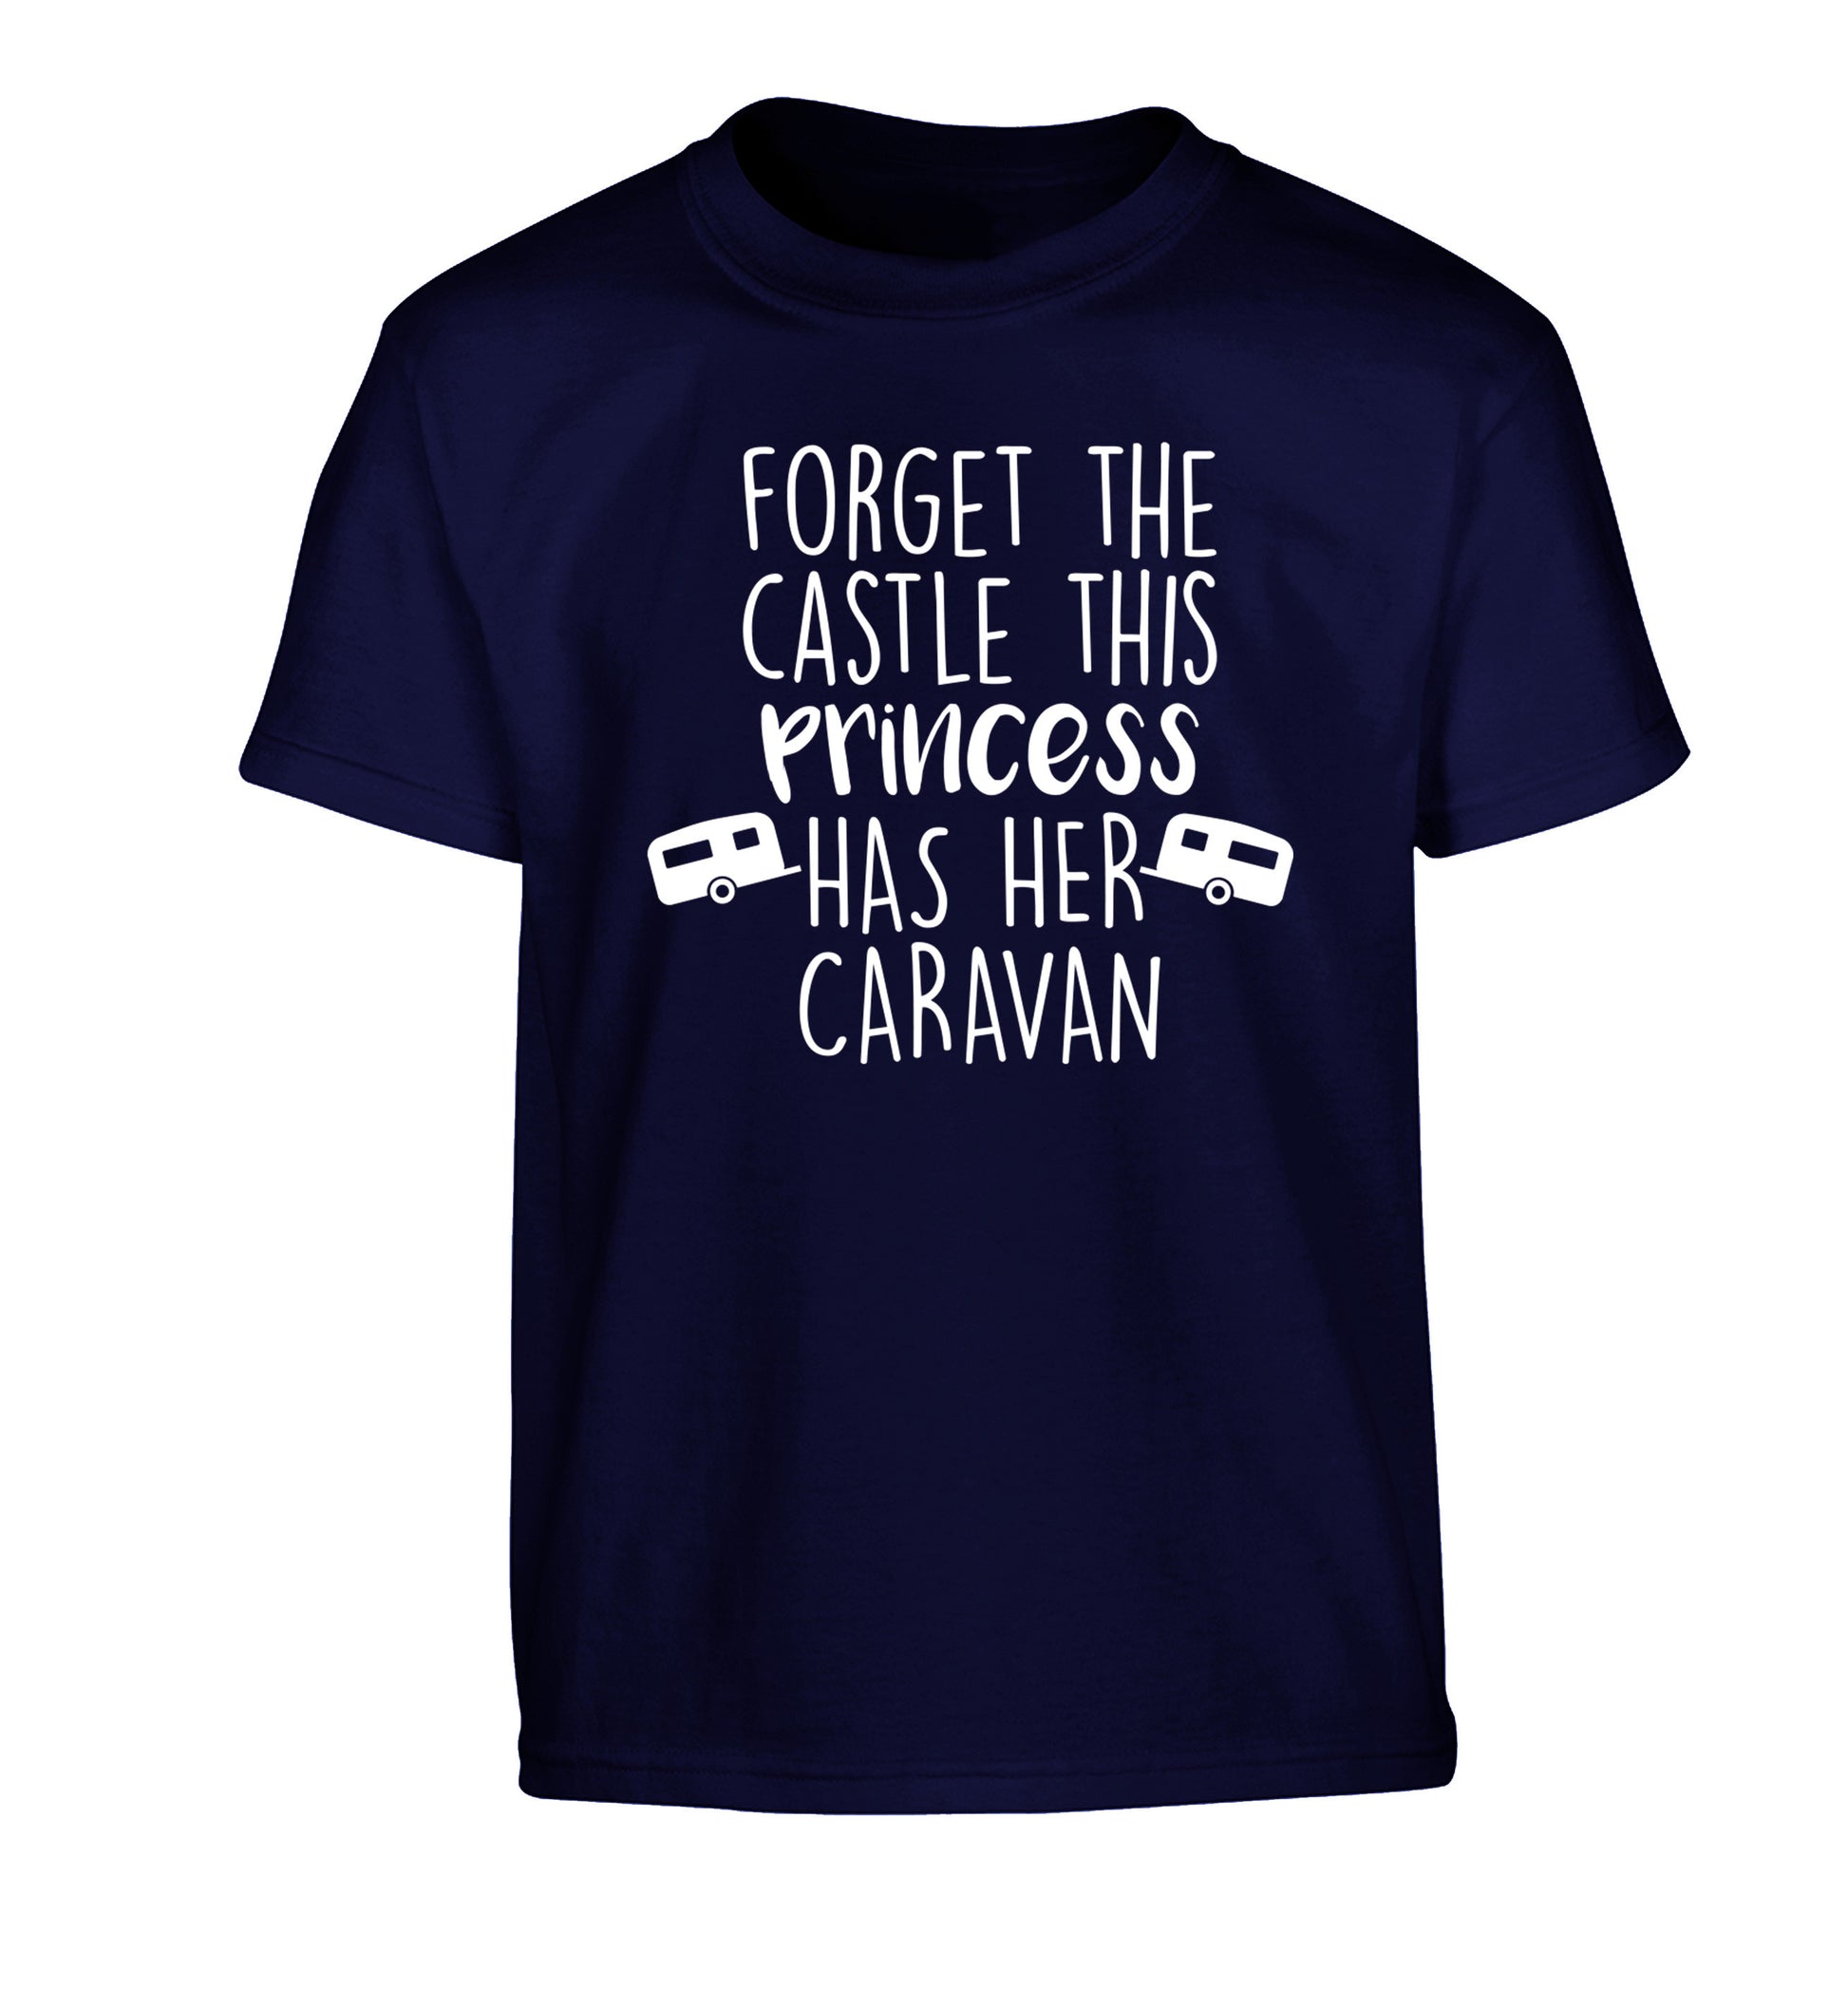 Forget the castle this princess lives at the caravan Children's navy Tshirt 12-14 Years